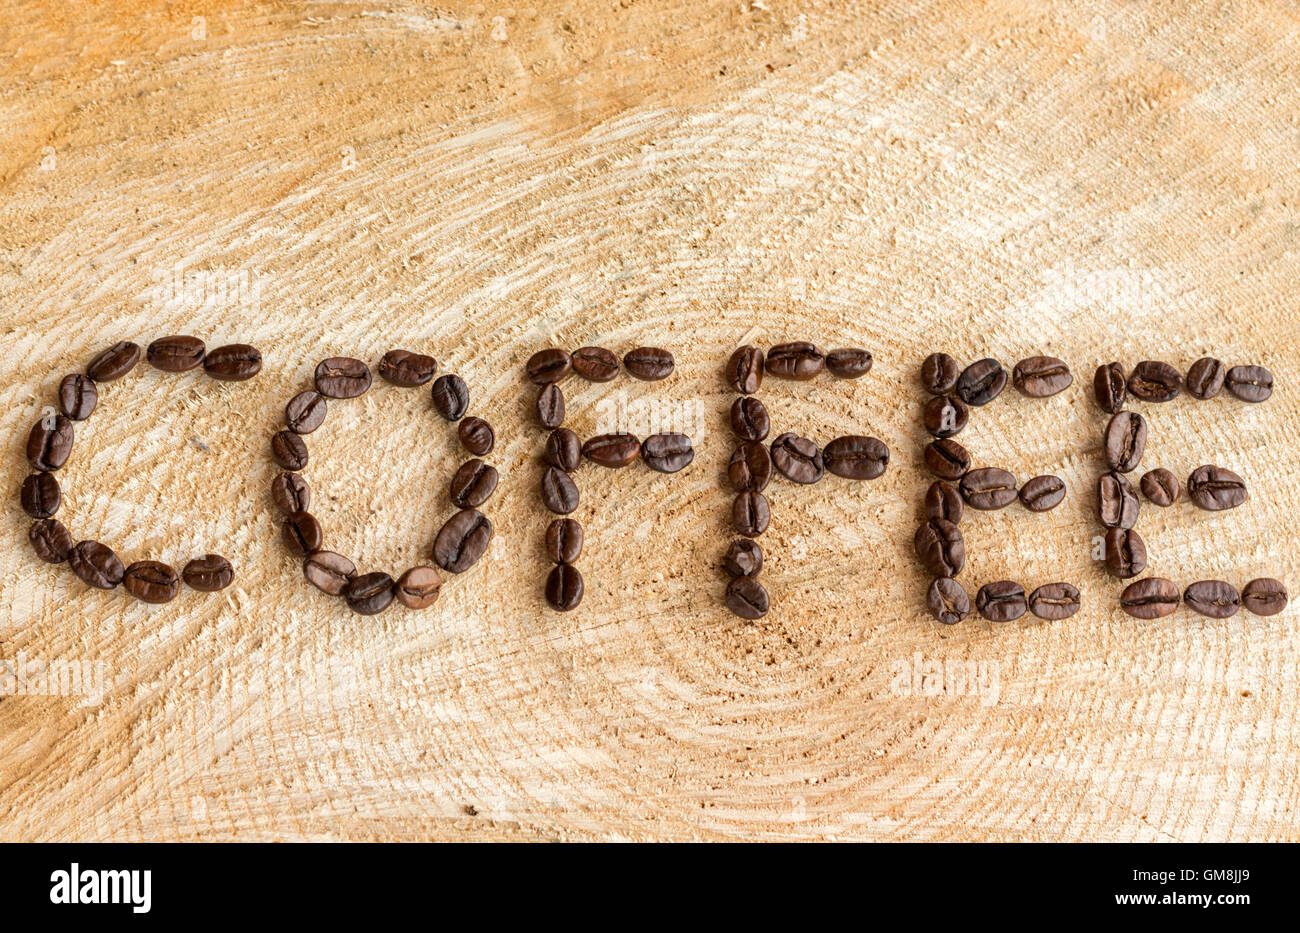 The word Coffee laid out using roasted coffee beans on a natural wood background. Stock Photo